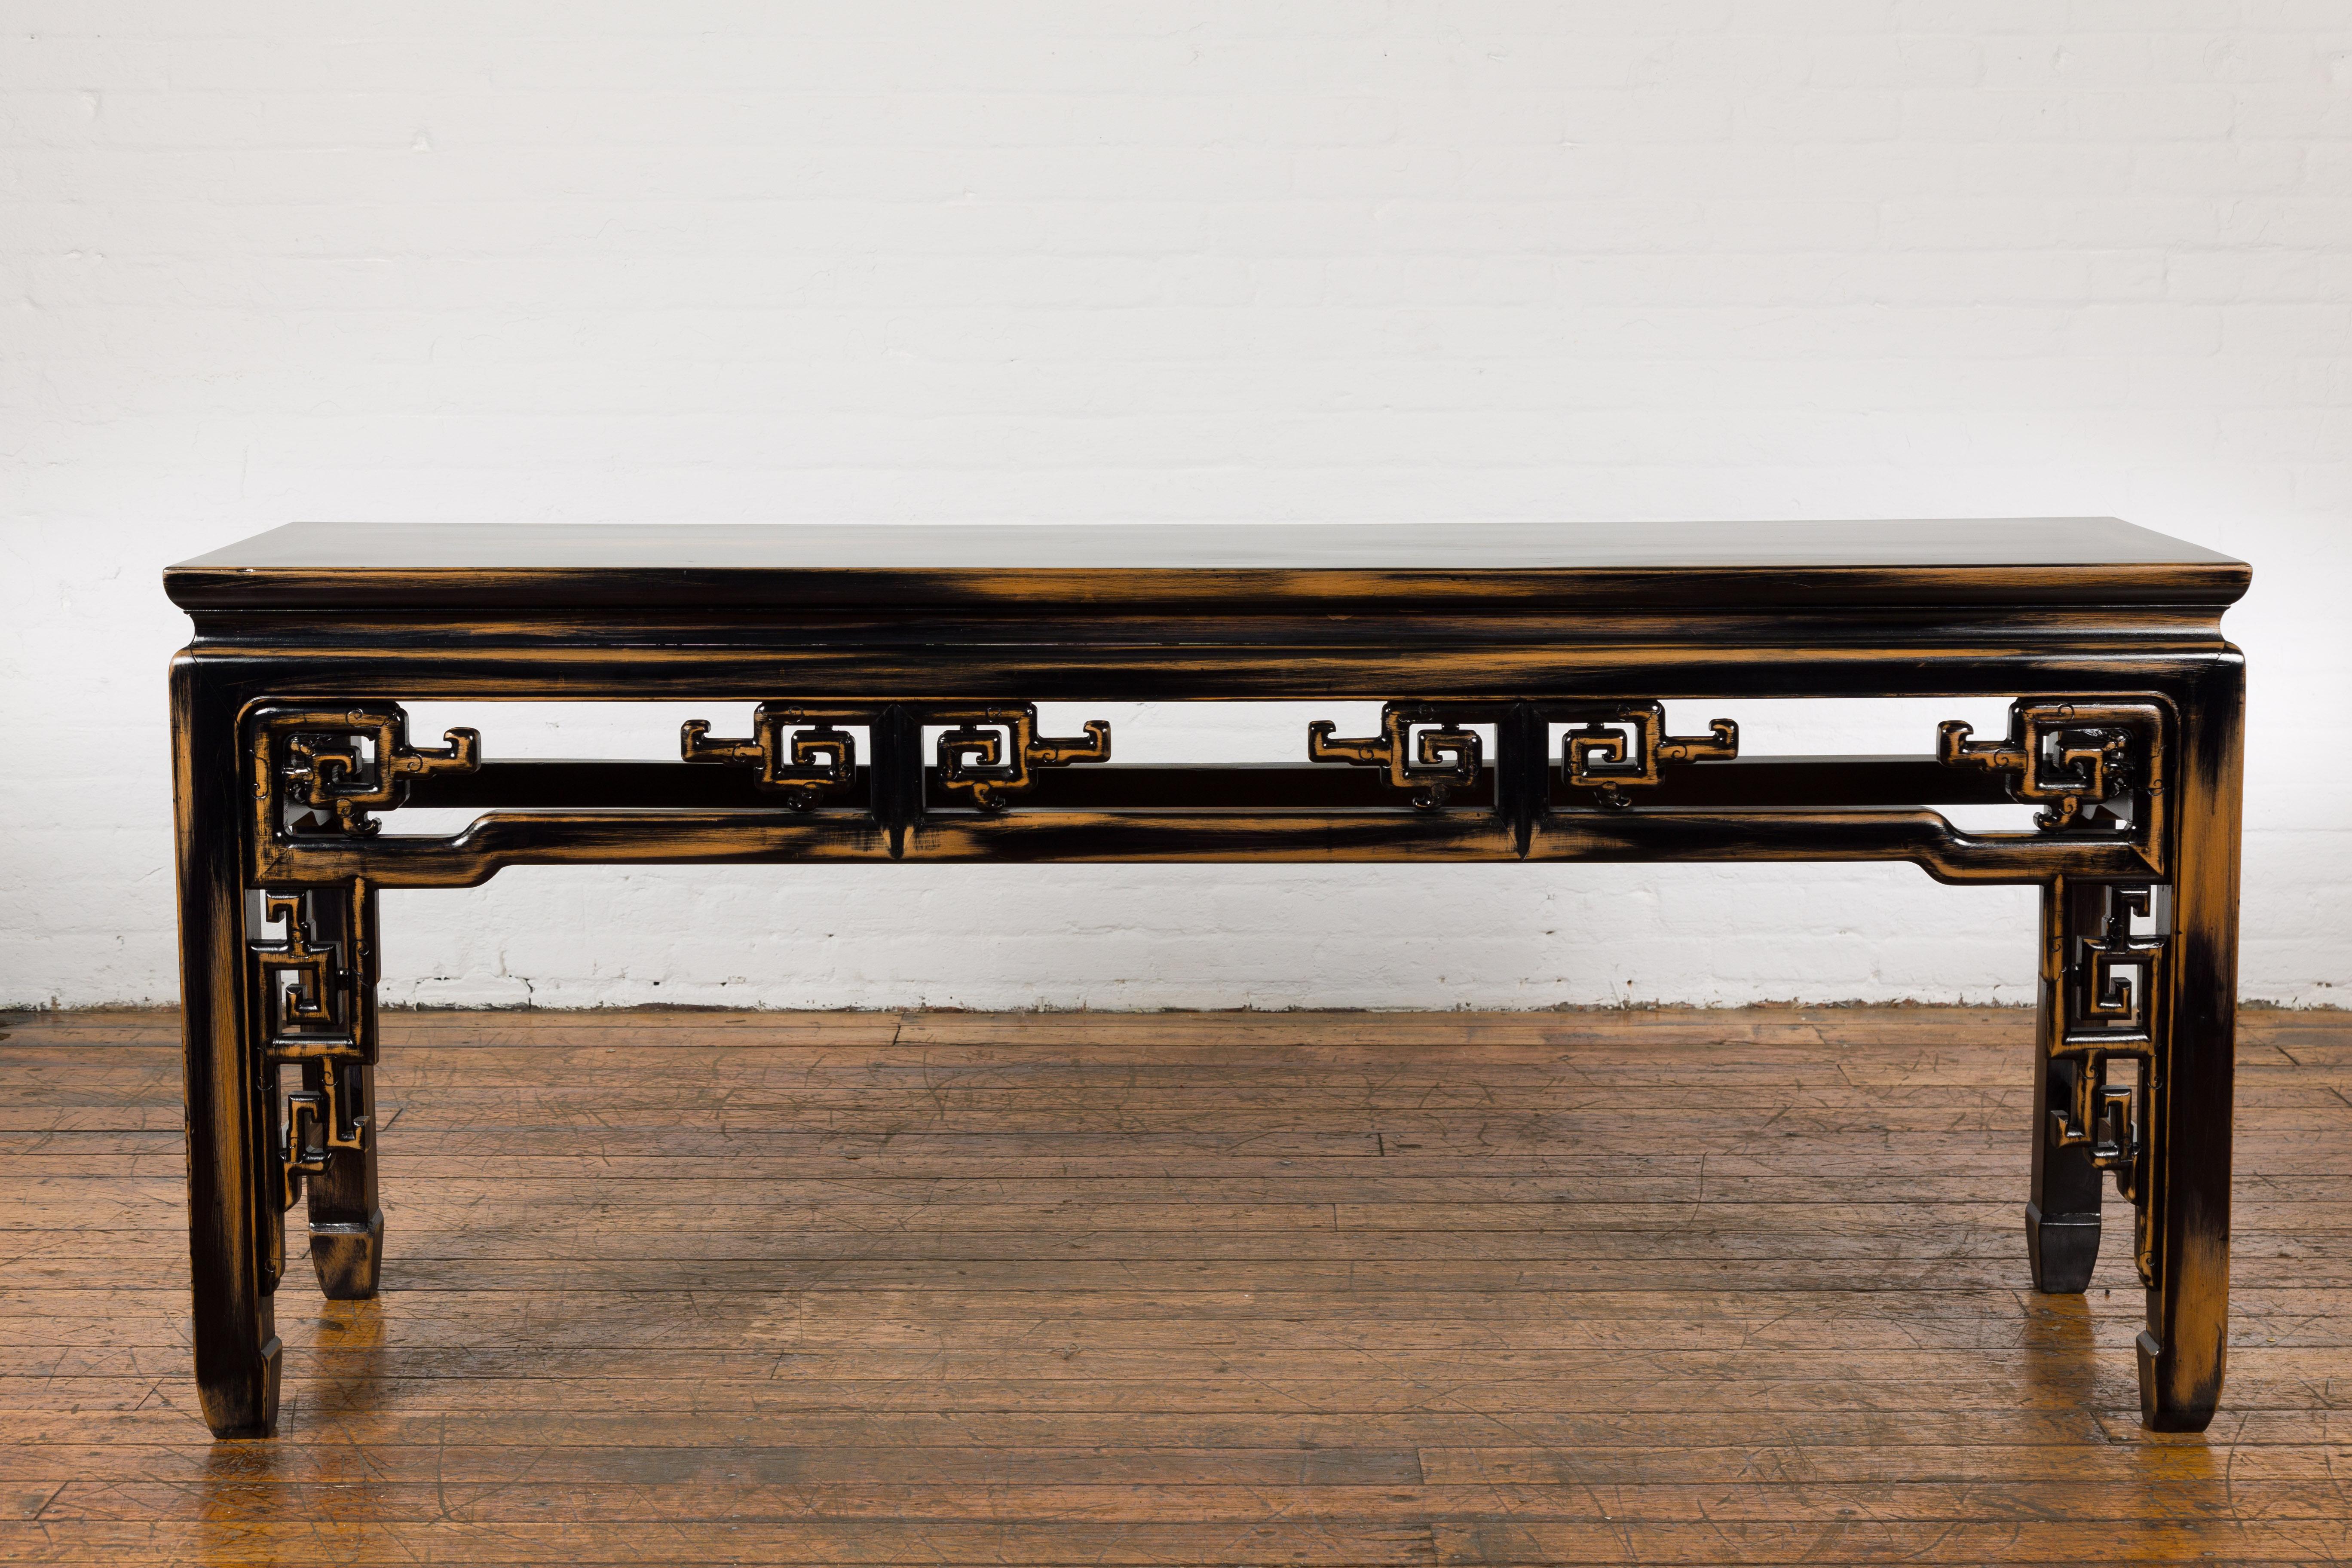 A Chinese Vintage Black and Brown Low Console Table from the mid 20th century with carved apron. Embrace the allure of vintage splendor with this stunning mid-20th century Chinese low console table, which skillfully blends distressed black and brown